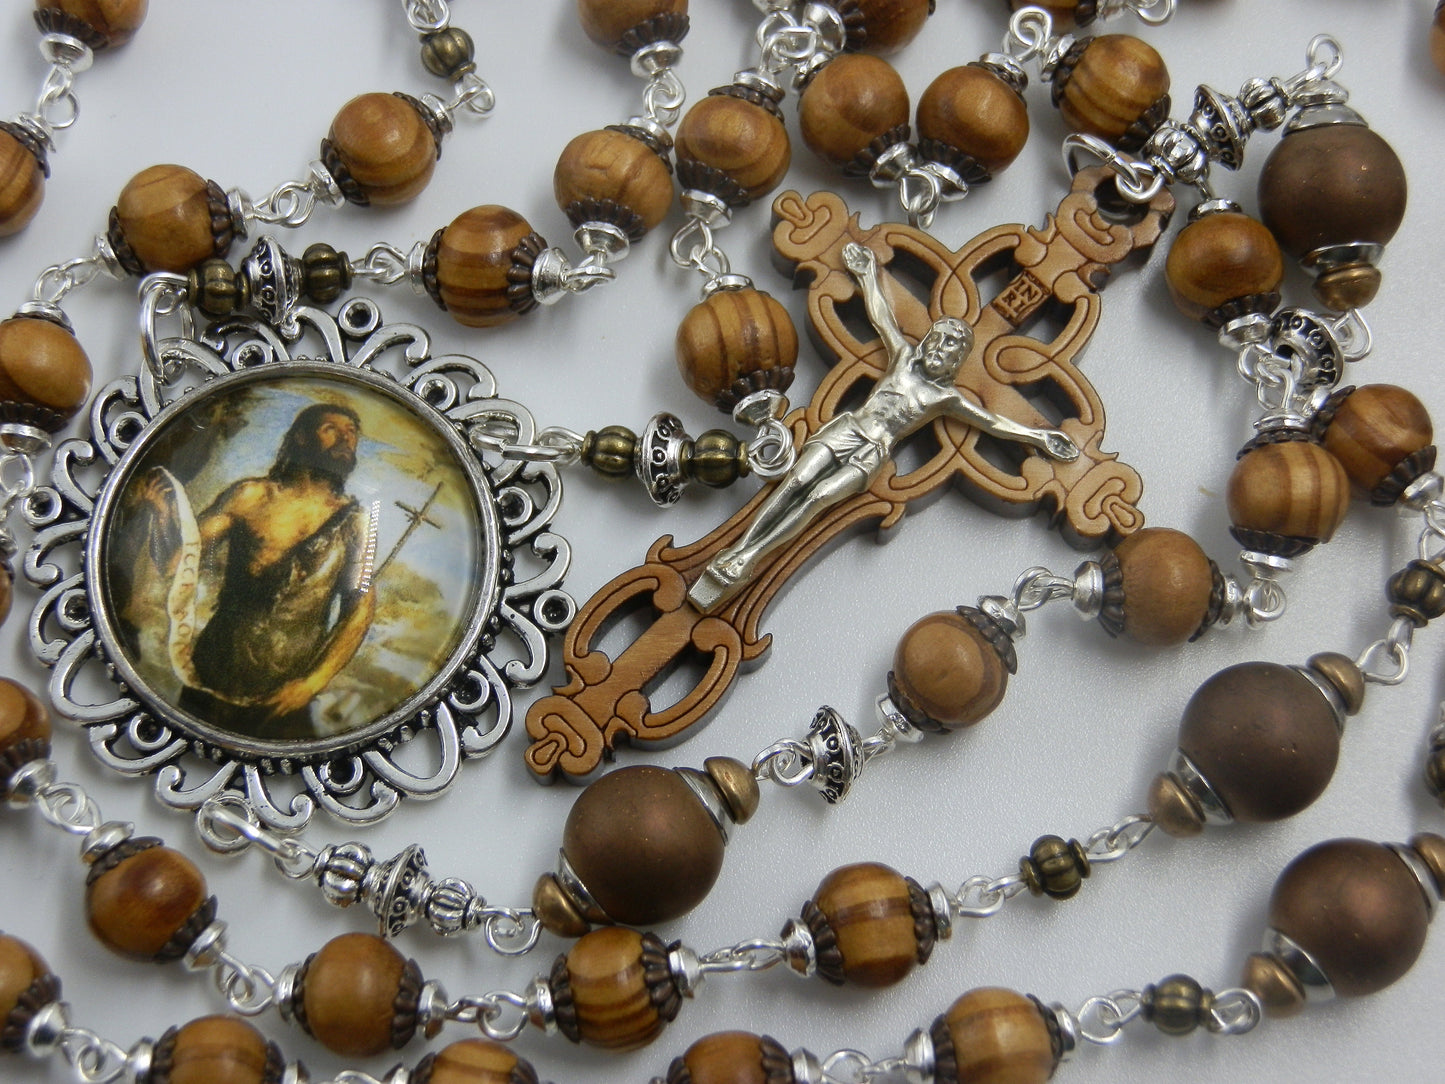 John the Baptist Rosaries, Wooden Rosary beads, Olive wood Crucifix, St. John Rosary beads, Vintage style rosary beads, Men's Rosaries.